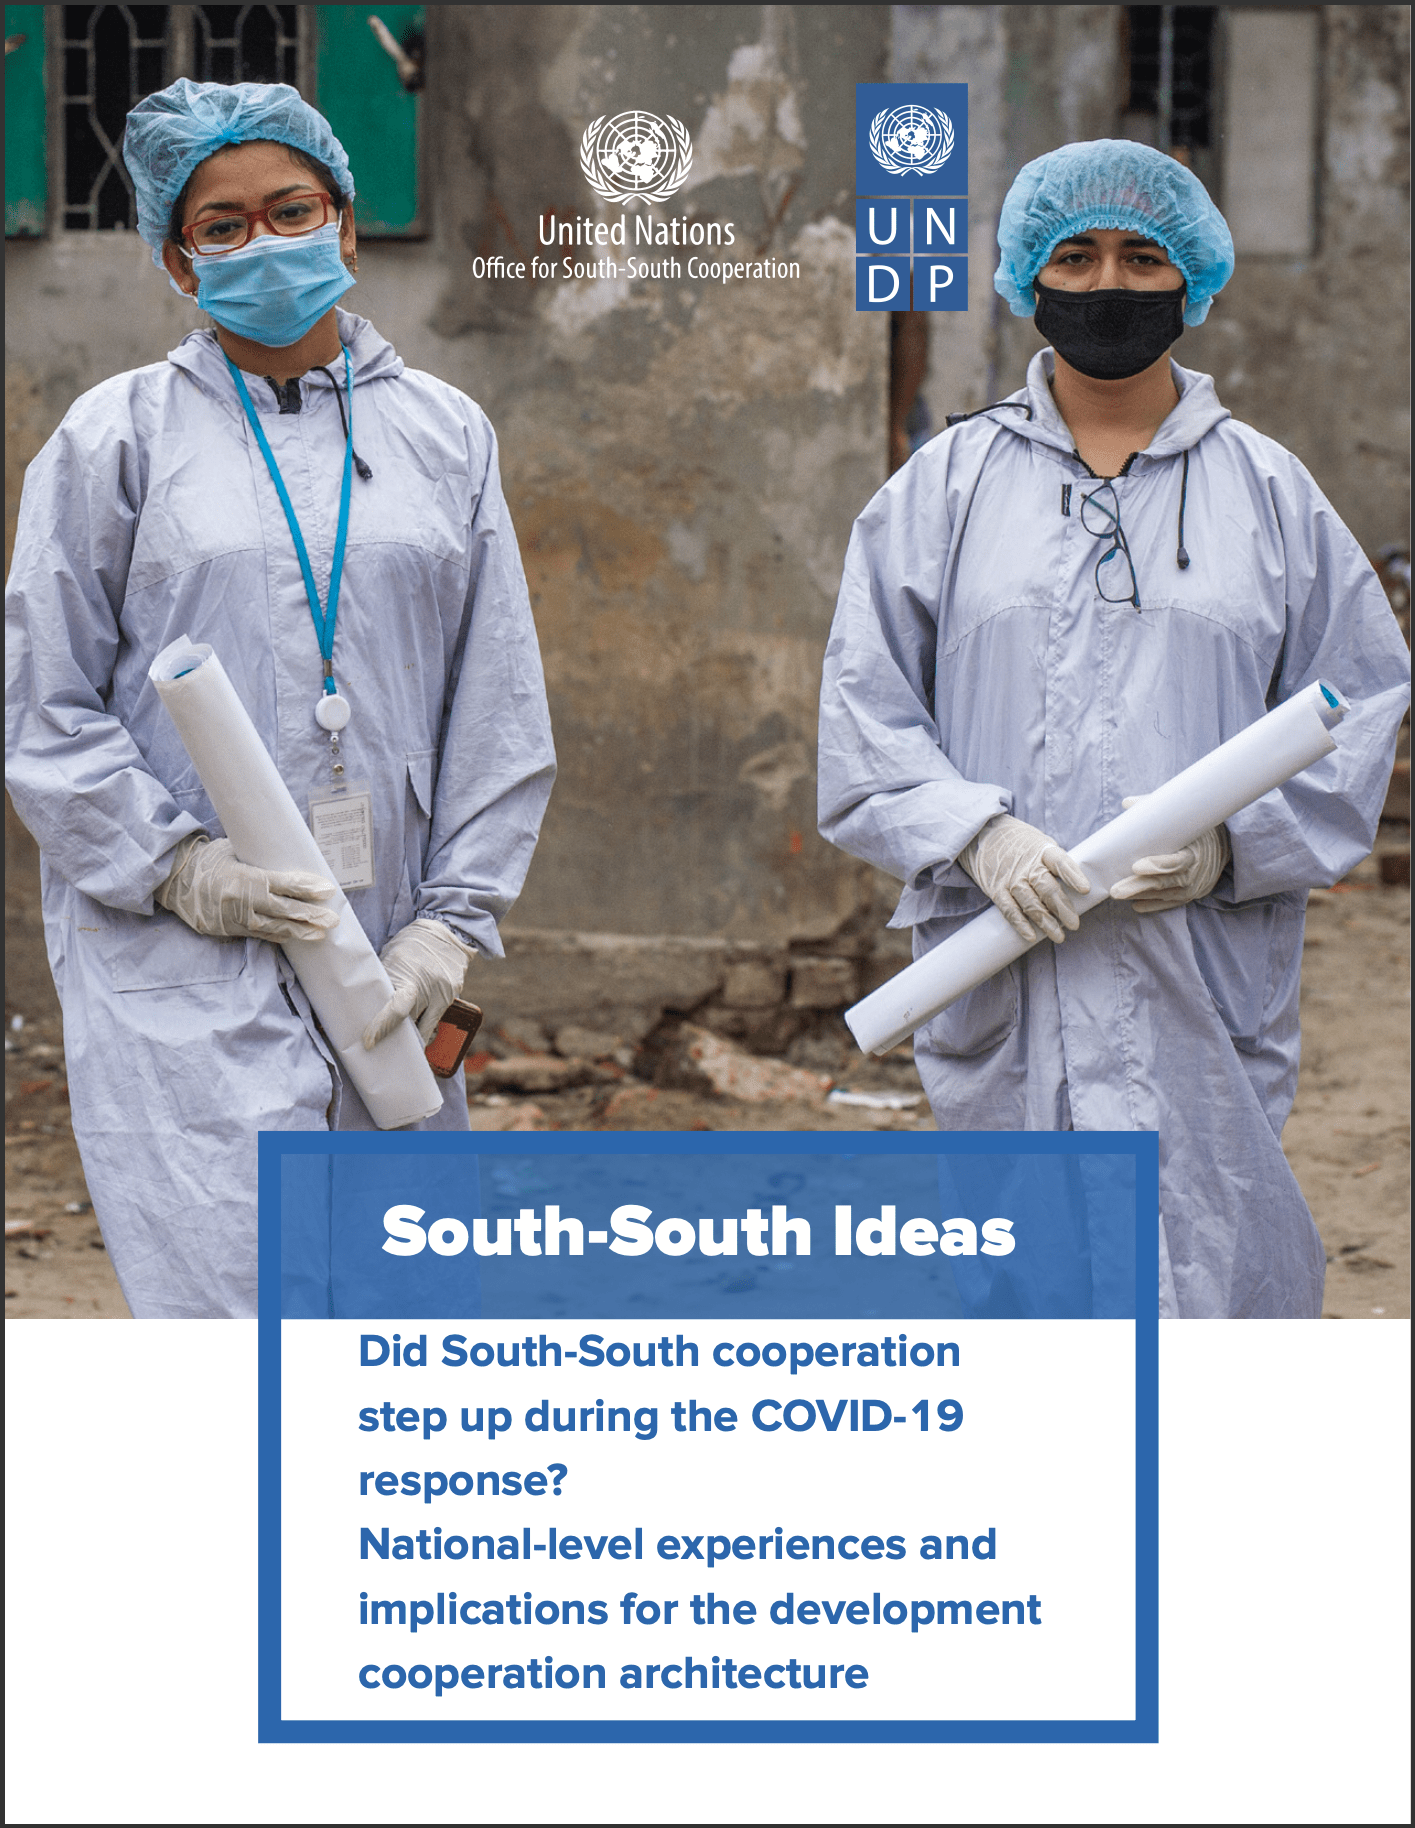 South-South Ideas: Did South-South Cooperation Step Up During the COVID-19 Response? National-Level Experiences & Implications for the Development Cooperation Architecture